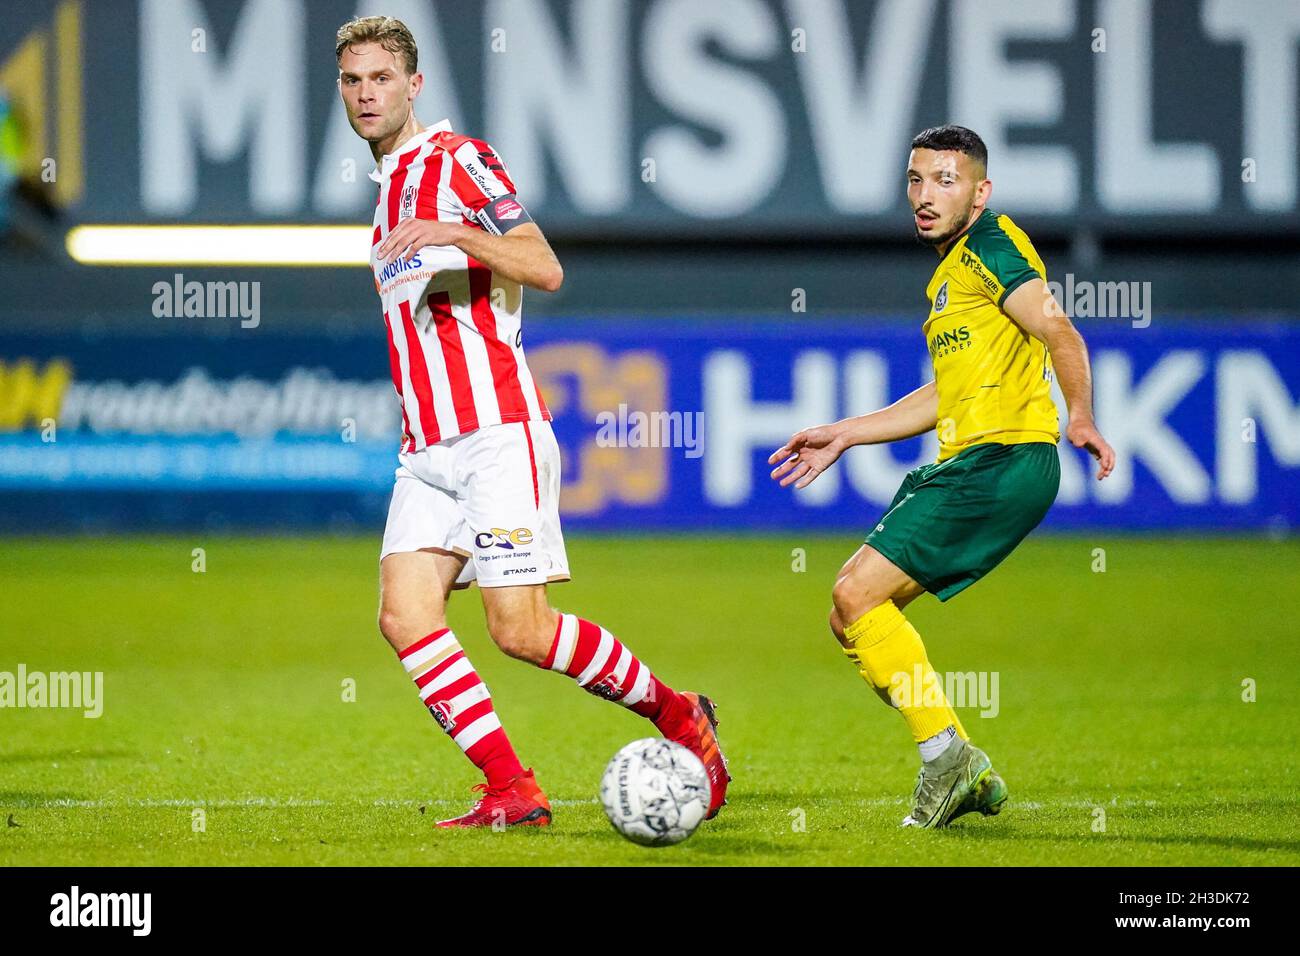 SITTARD, NETHERLANDS - OCTOBER 27: Rick Stuy van den Herik of TOP Oss battles for the ball with Arianit Ferati Fortuna Sittard prior to the Dutch TOTO KNVB Cup match between